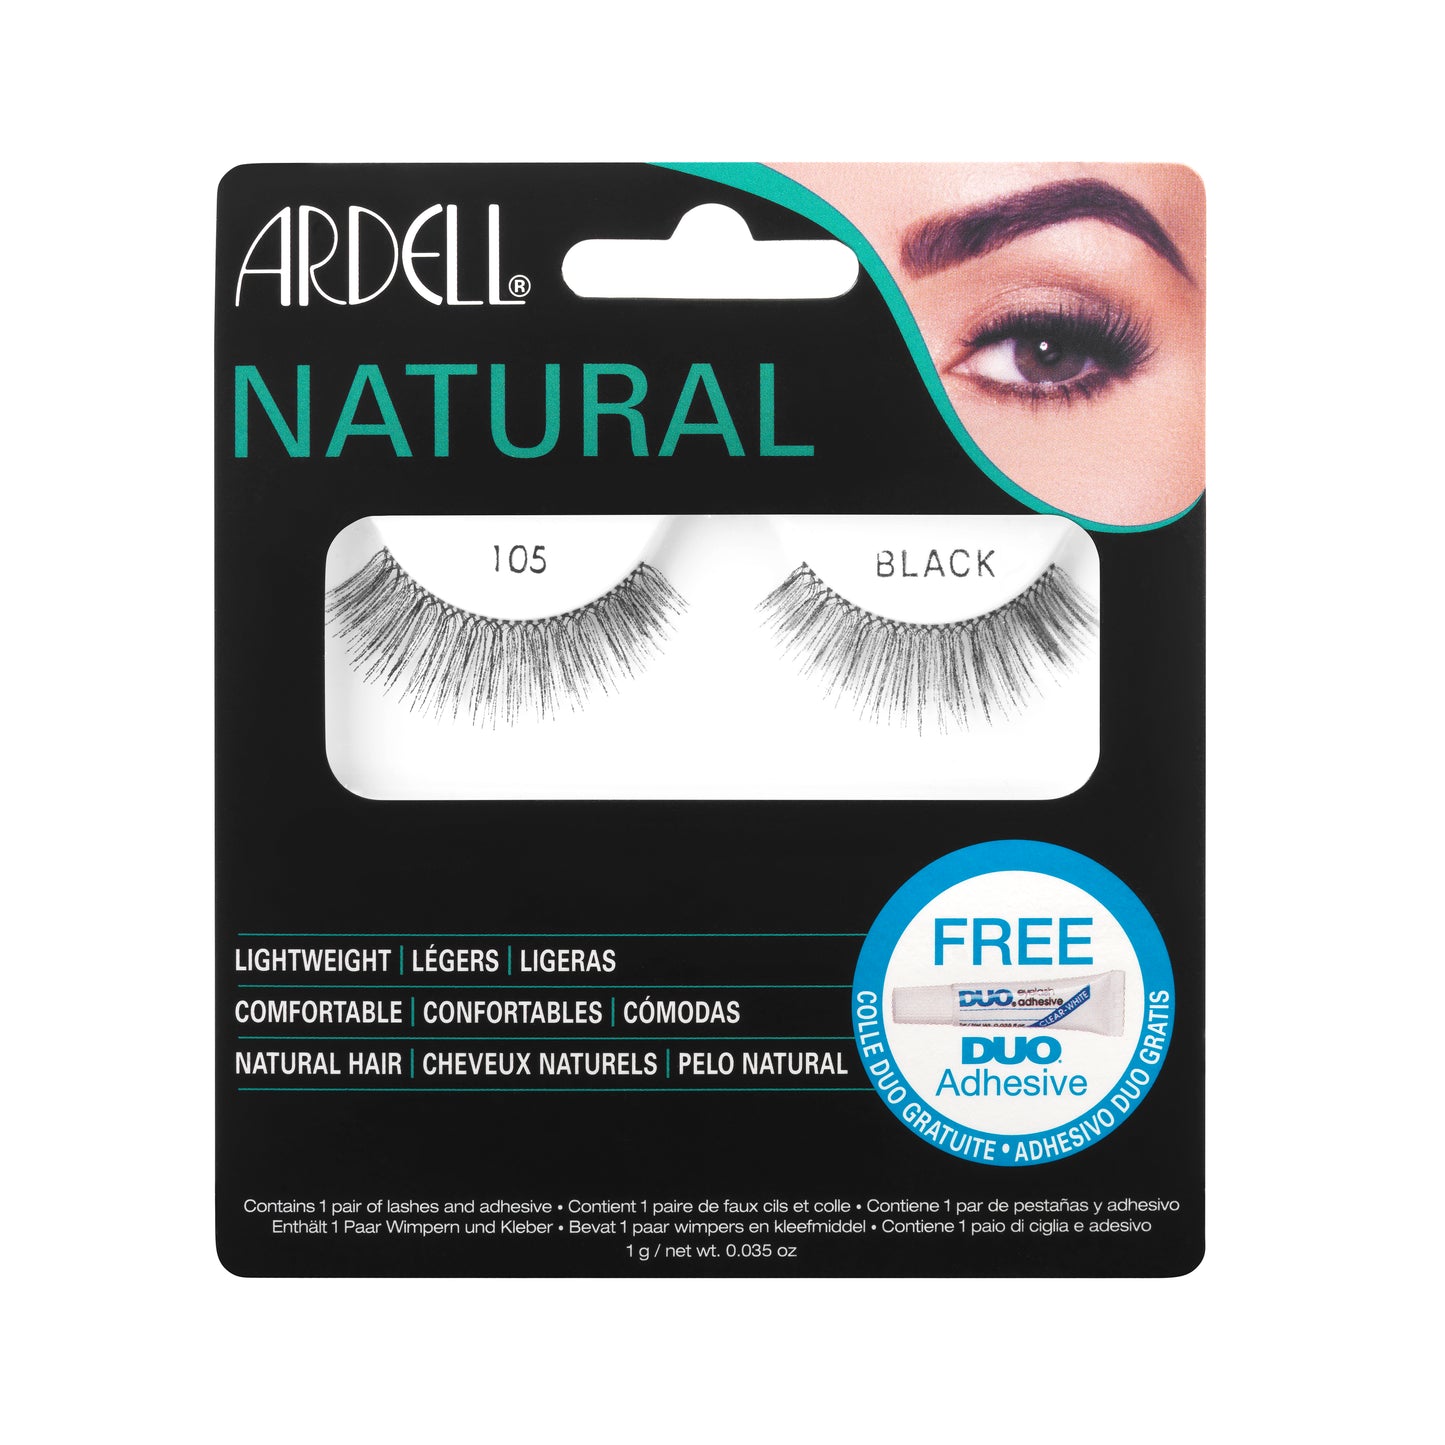 Load image into Gallery viewer, Ardell Natural 105 Lashes Black
